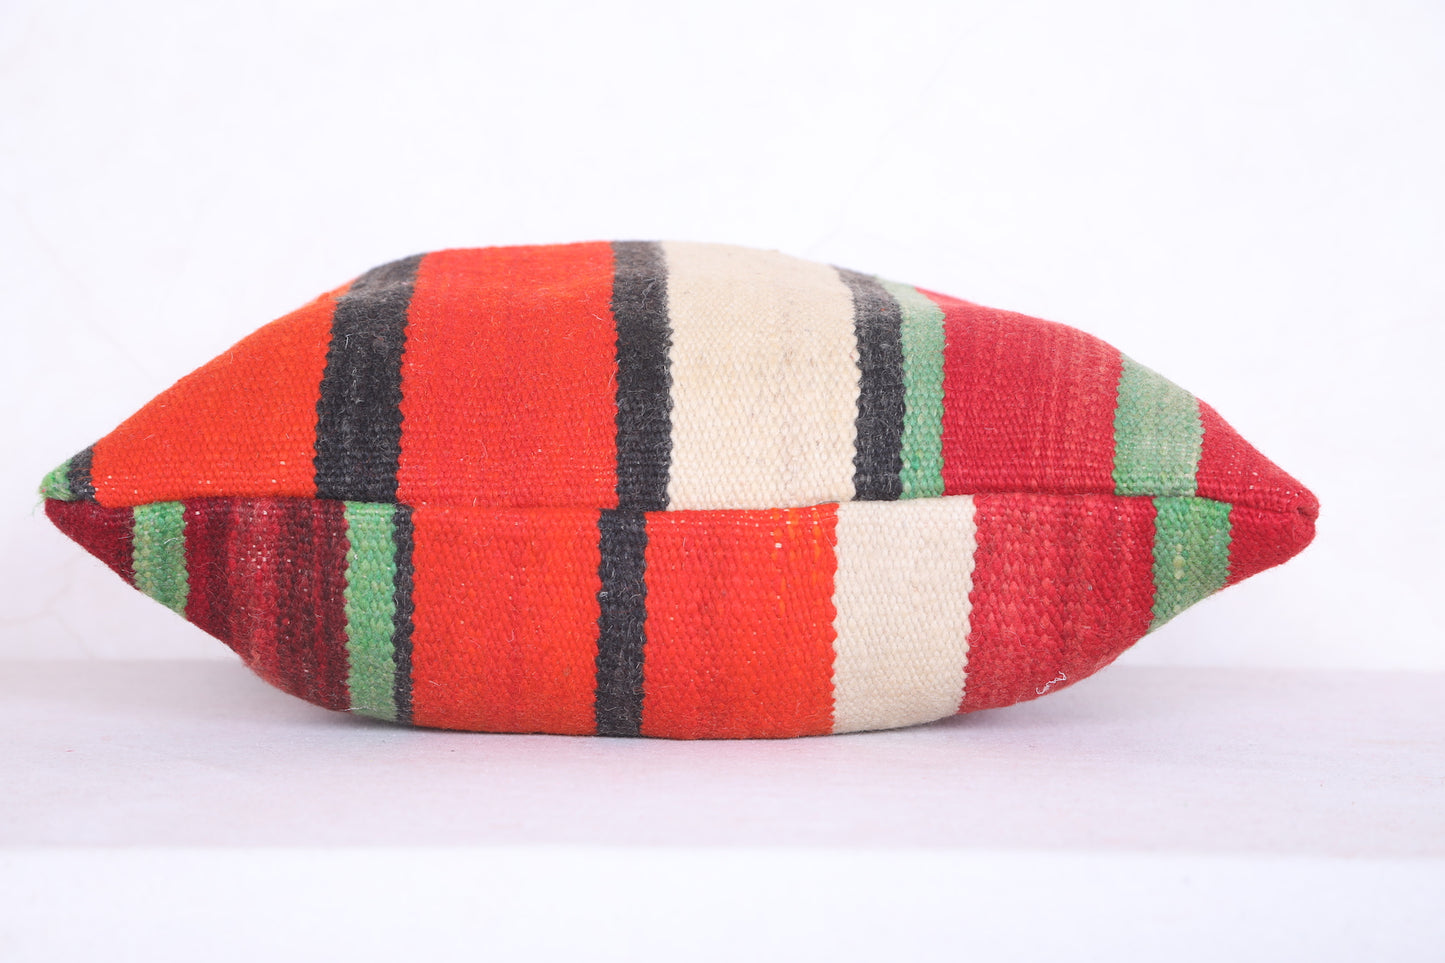 Moroccan handmade kilim pillow 16.5 INCHES X 16.5 INCHES